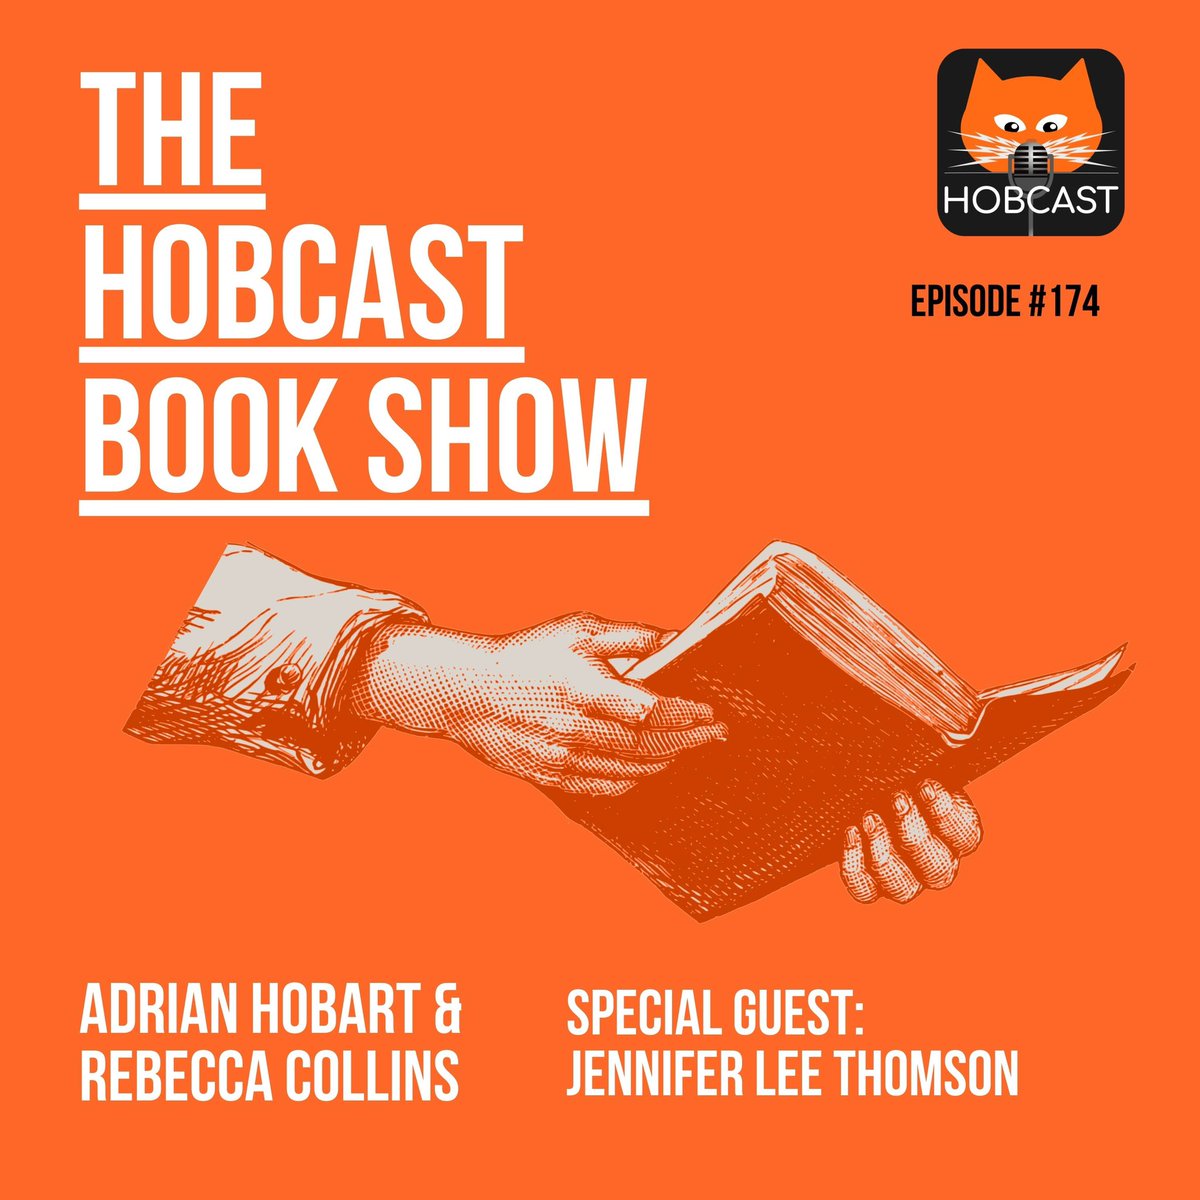 Jennifer Lee Thomson is featured as a special guest on The Hobcast Book Show Ep.174 where she discusses the creative power of longhand writing, her new novel Vigilante City, and more! Listen to the #Podcast at shows.acast.com/646f7fb53c7f5e… #BookPodcast @HobeckBooks @jenthom72